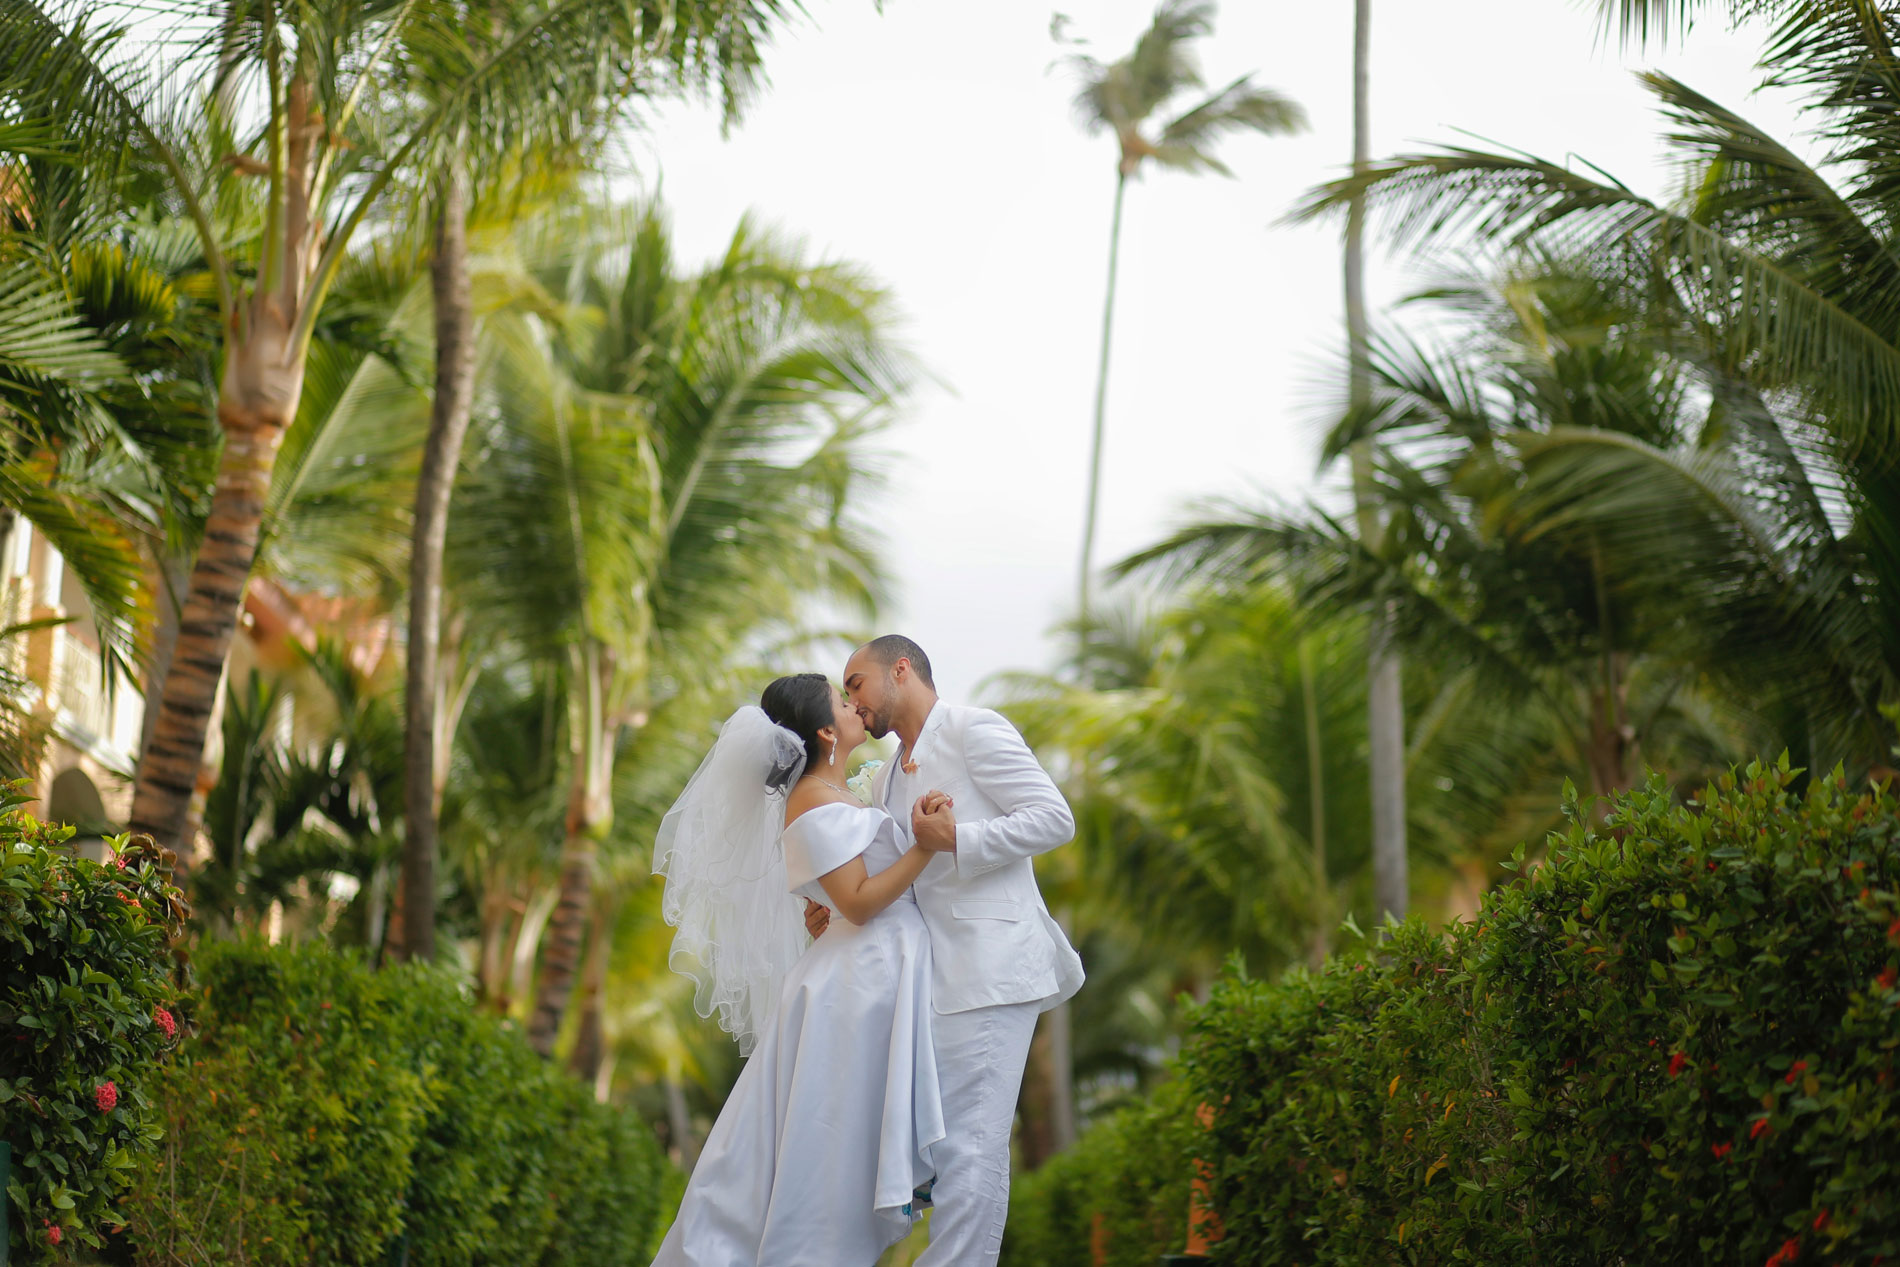 5 Reasons to Have a Destination Wedding